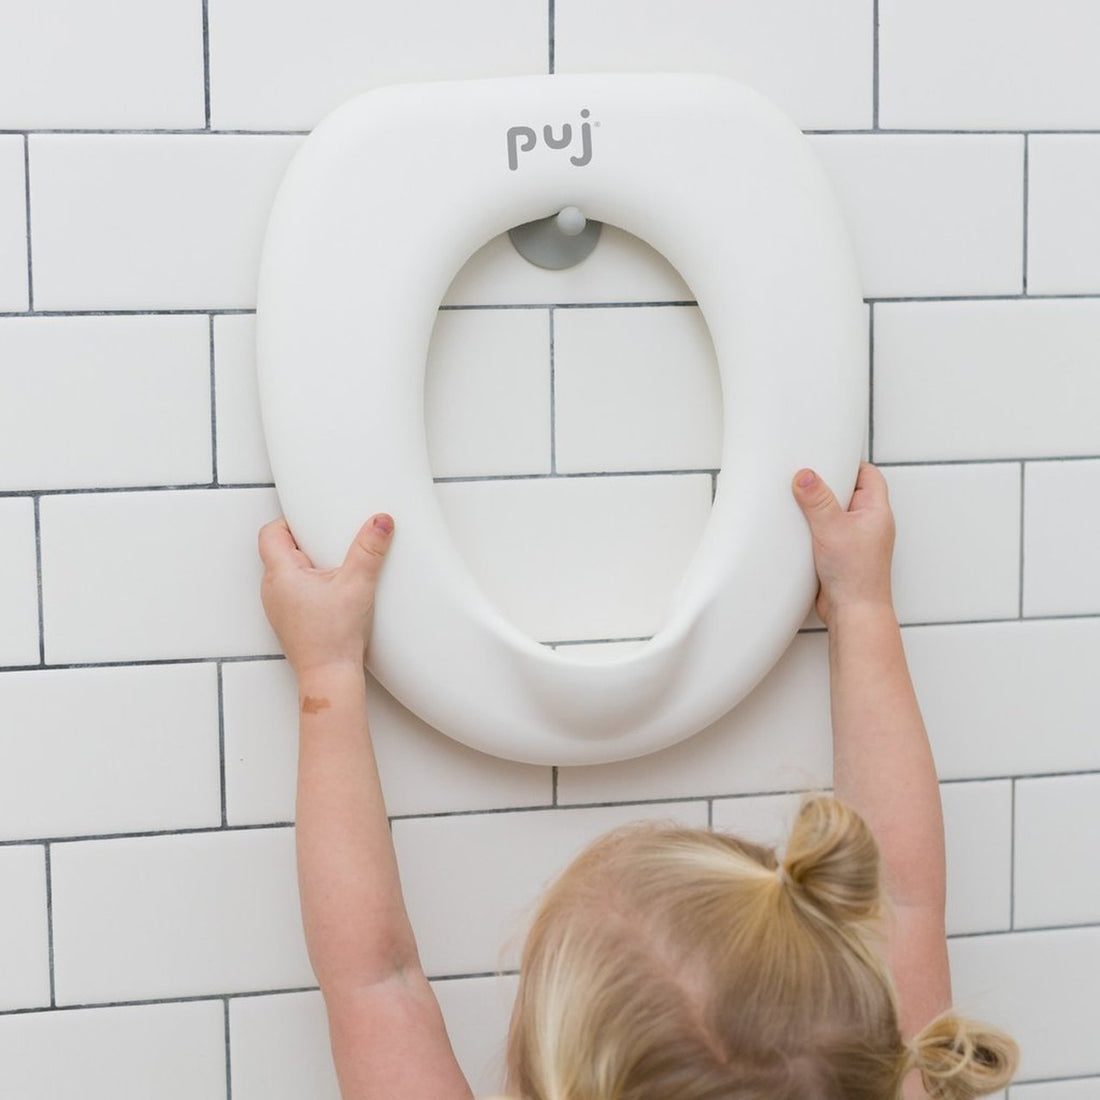 Potty Training is Hard, but Puj Makes it Easier!